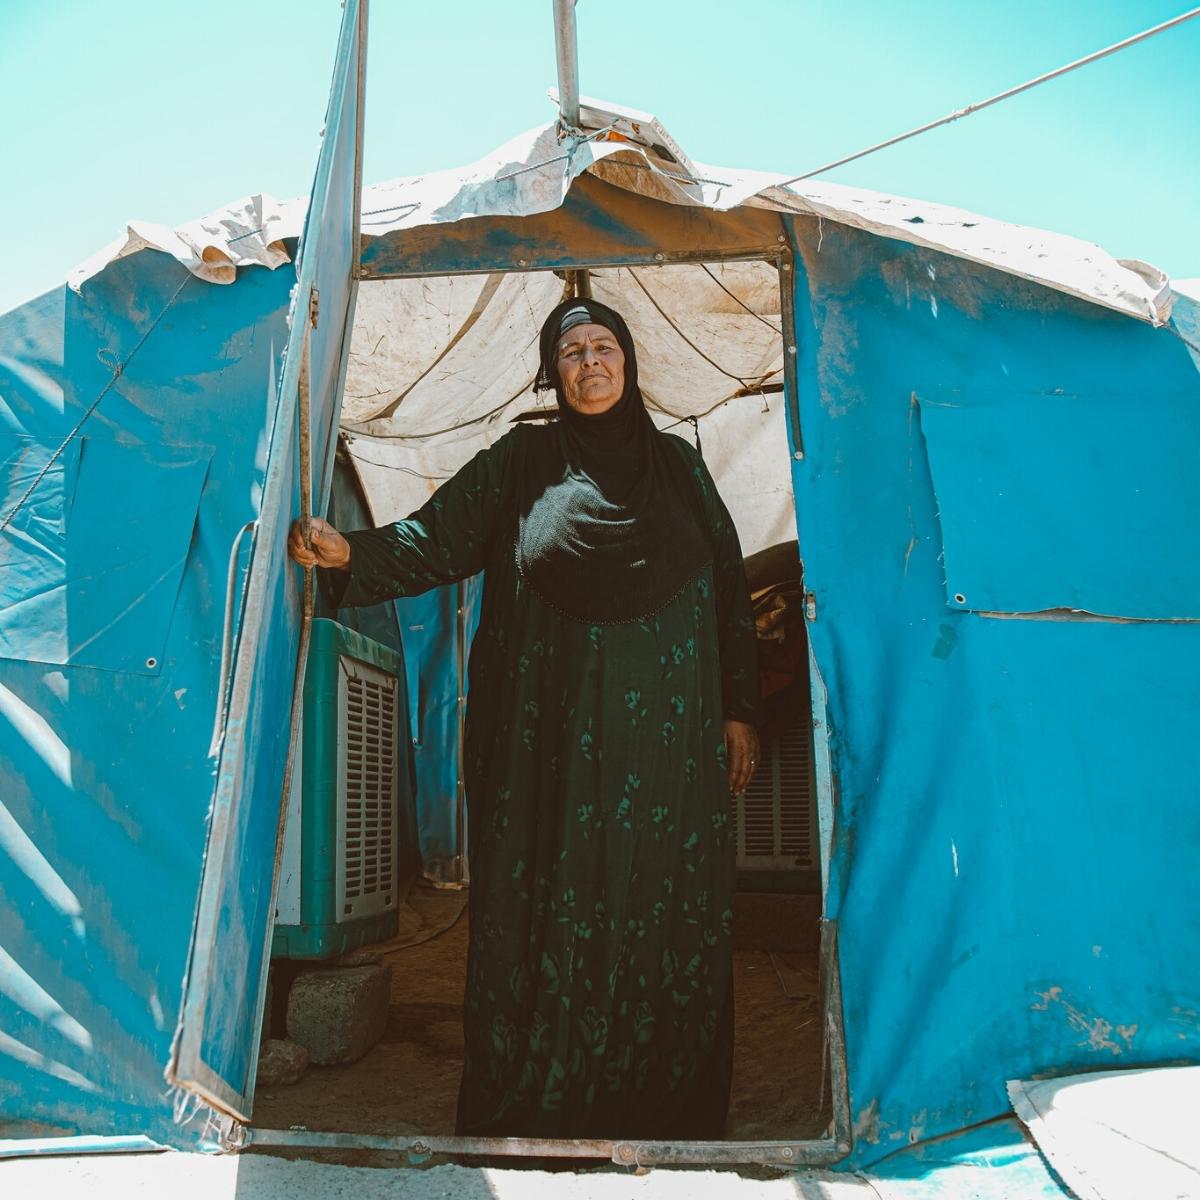 An elderly light-skinned woman stands in the doorway of her family's light blue tent. The woman is wearing a long-sleeved ankle-length dark green patterned dress and a black headscarf. Behind her, the sky is clear and bright.